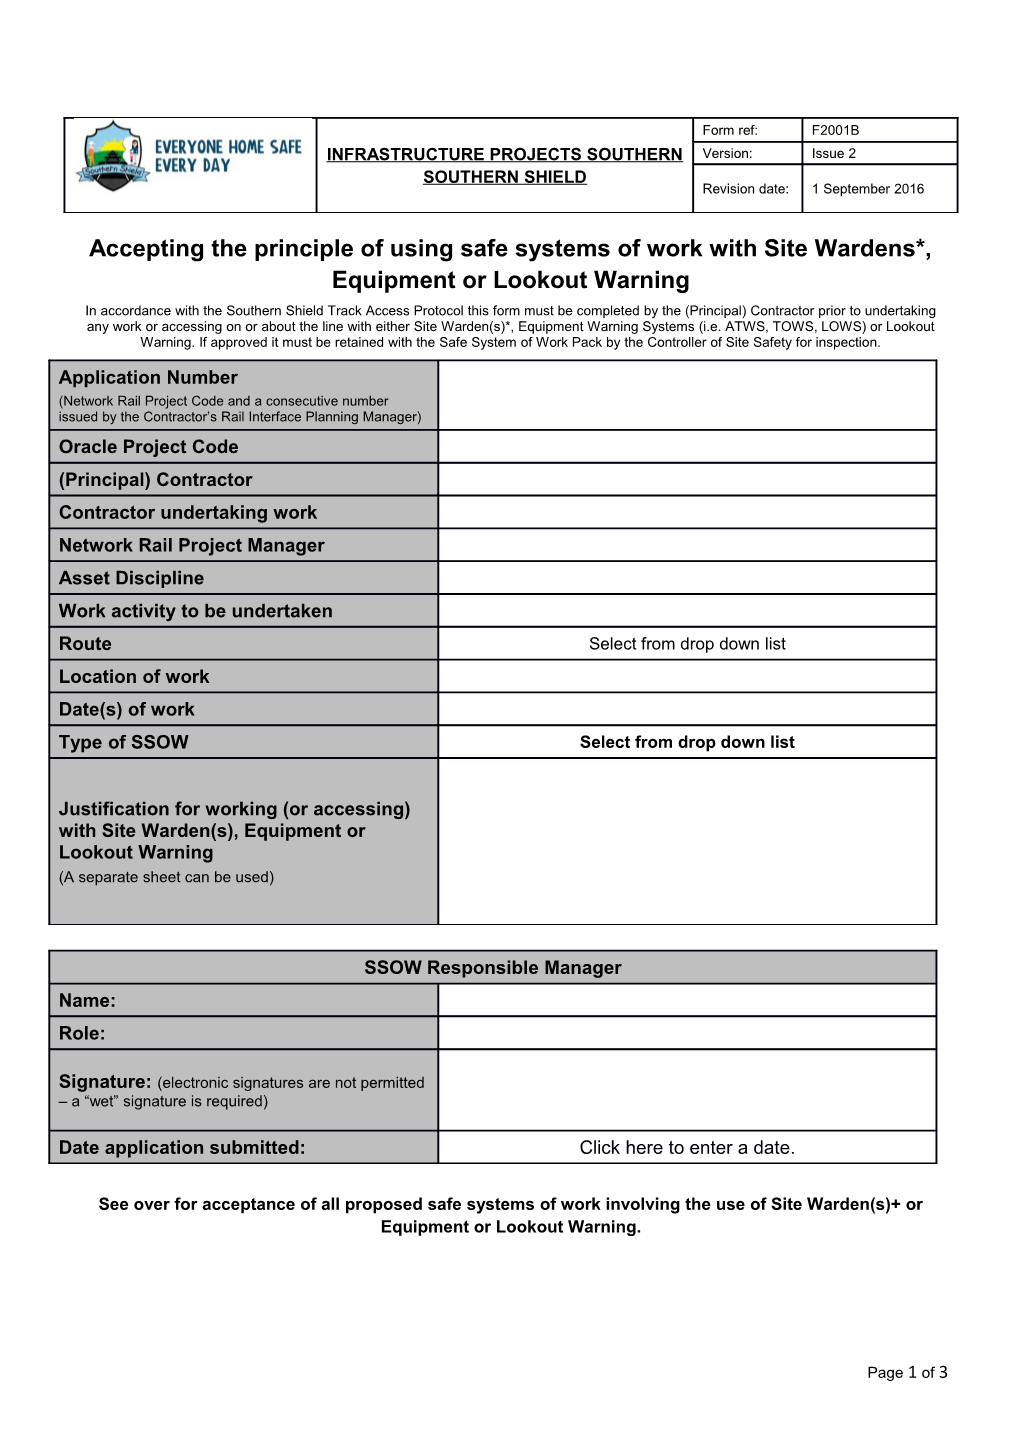 Accepting the Principle of Using Safe Systems of Work with Site Wardens*, Equipment Or